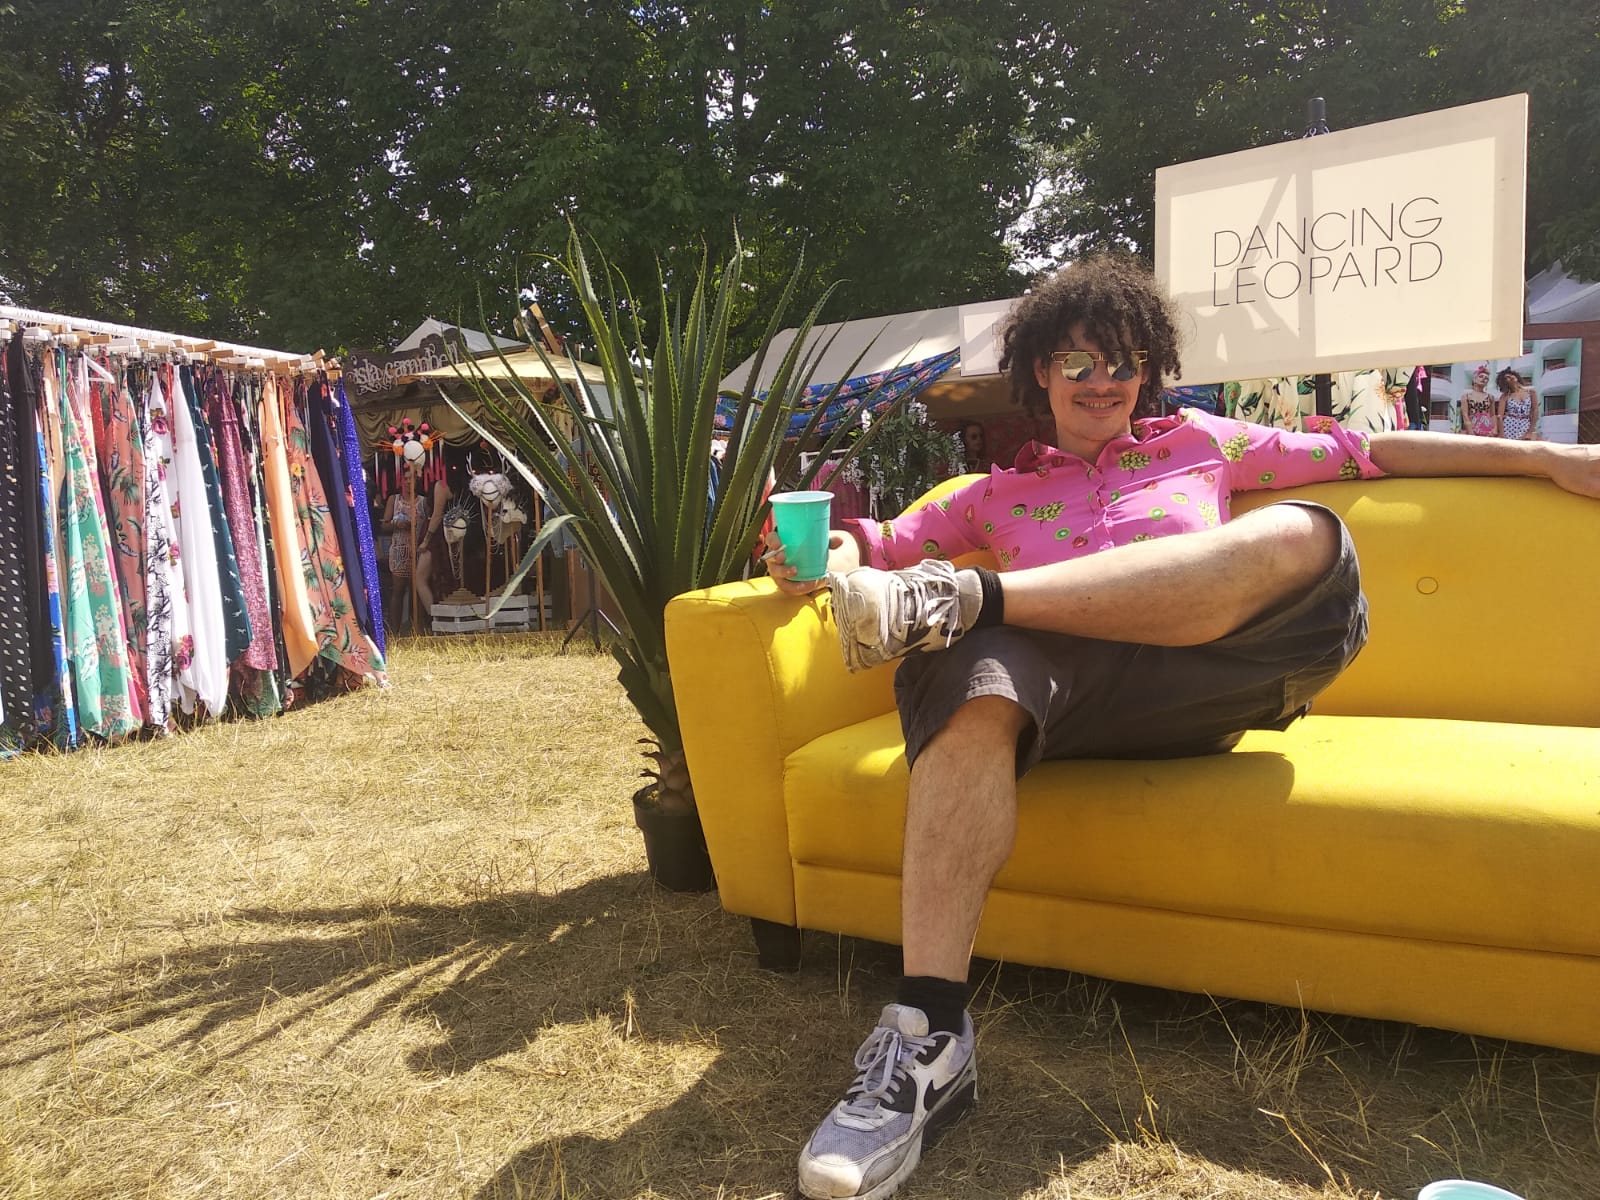 man sat on yellow sofa at Wilderness Festival in front of Dancing Leopard sign